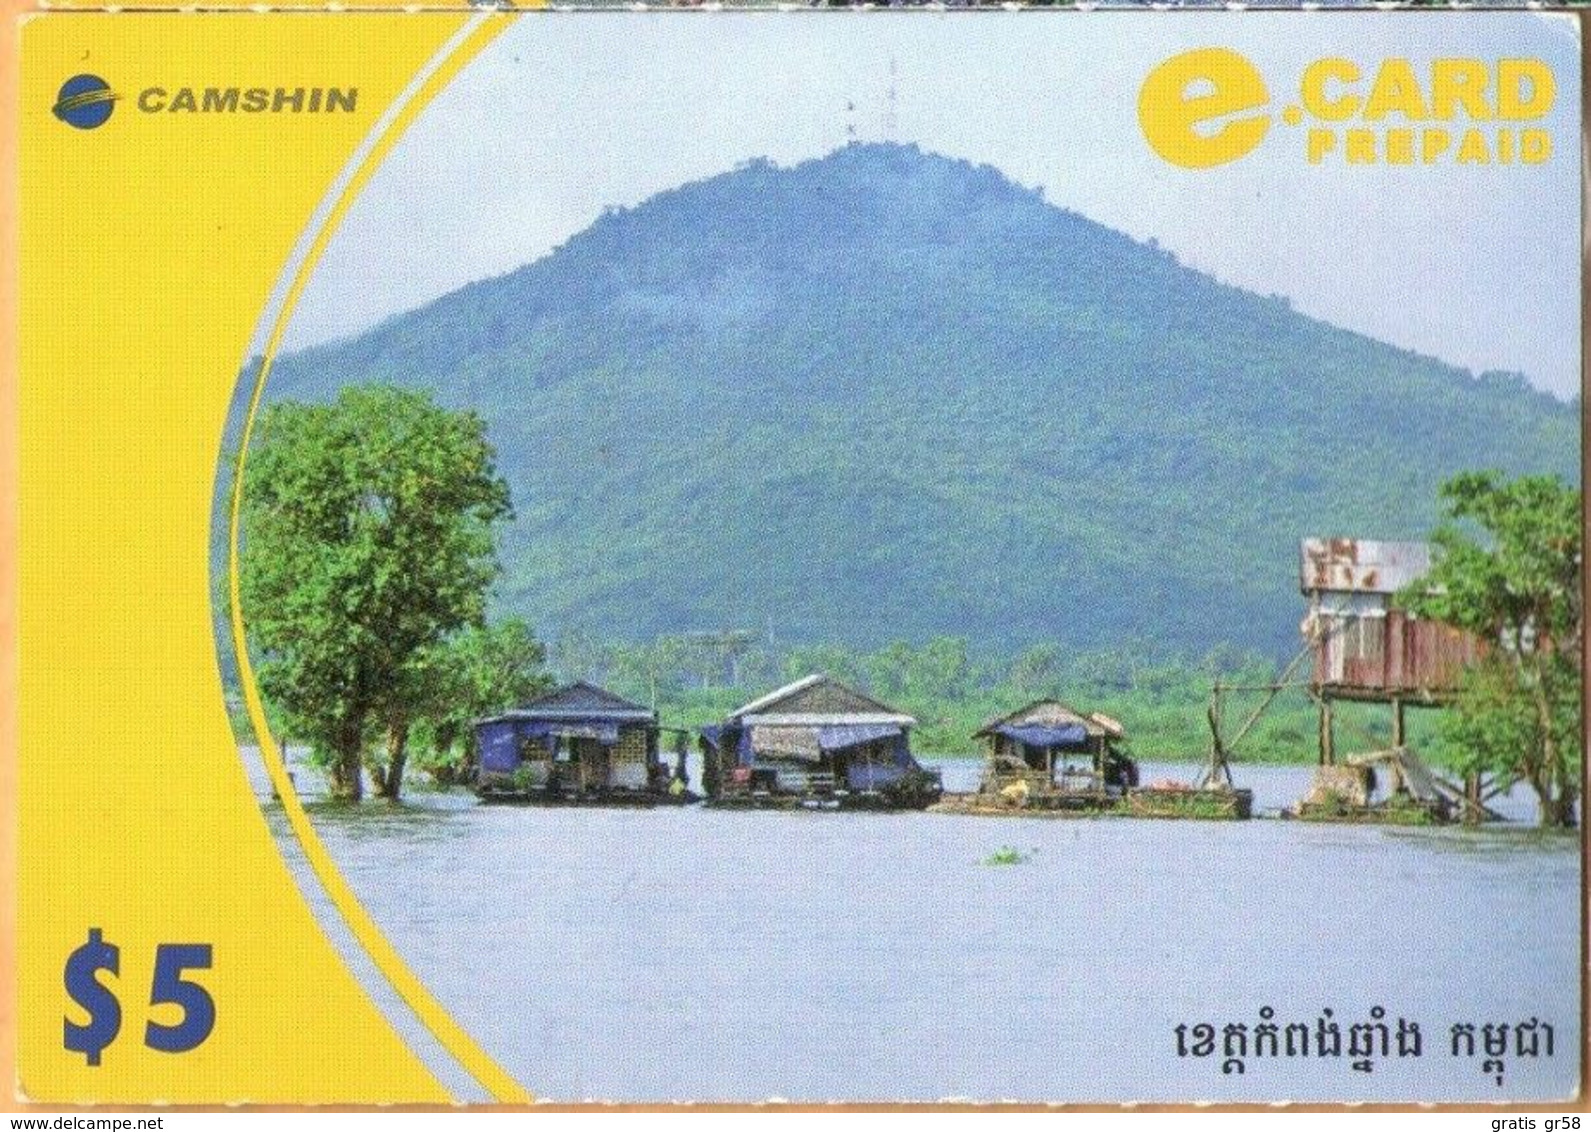 Cambodia - Camshin, GSM Mobile Refill; Cambodia Scenery, Village By The River, Paper Card, Used - Kambodscha